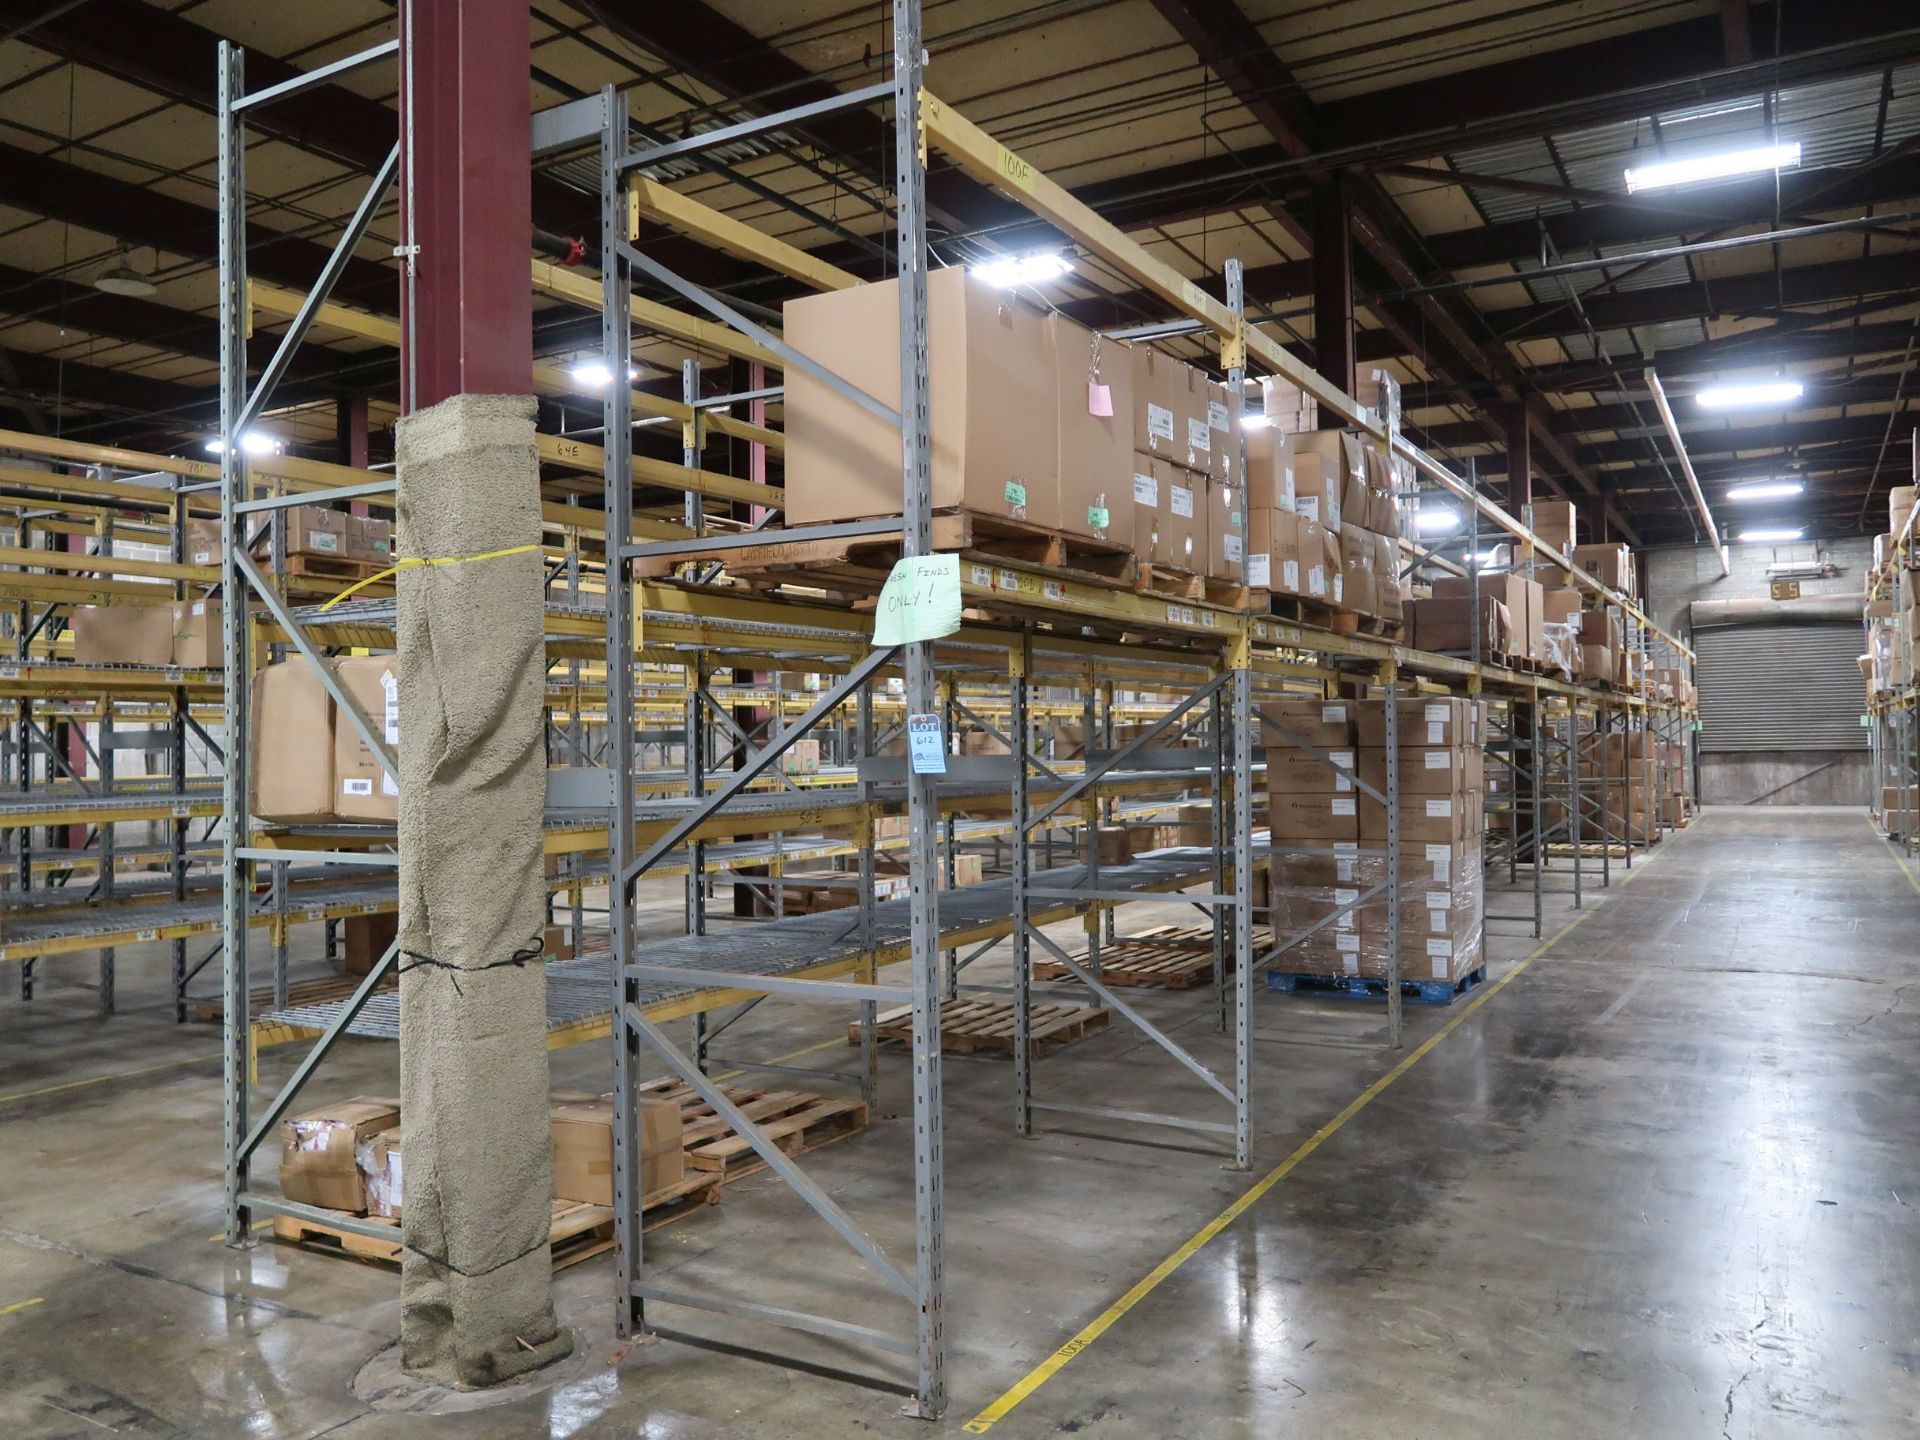 SECTIONS 96" X 42" X 144" ADJUSTABLE BEAM PALLET RACK; (26) 42" X 144" & (2) 42" X 168" UPRIGHTS, (